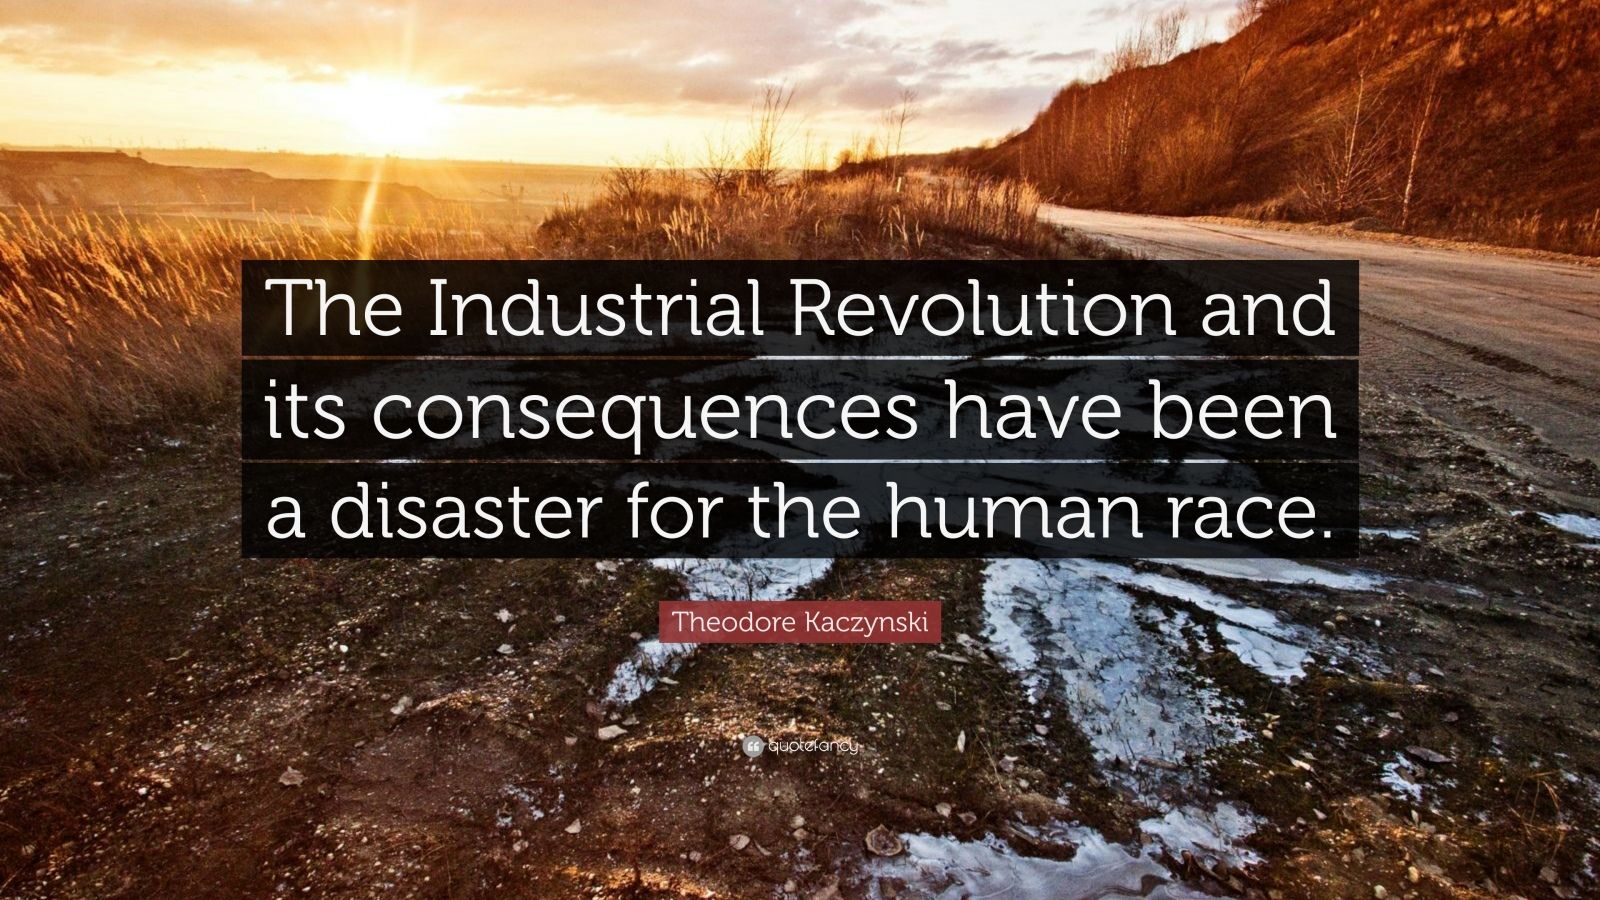 Theodore kaczynski quote âthe industrial revolution and its consequences have been a disaster for the human raceâ